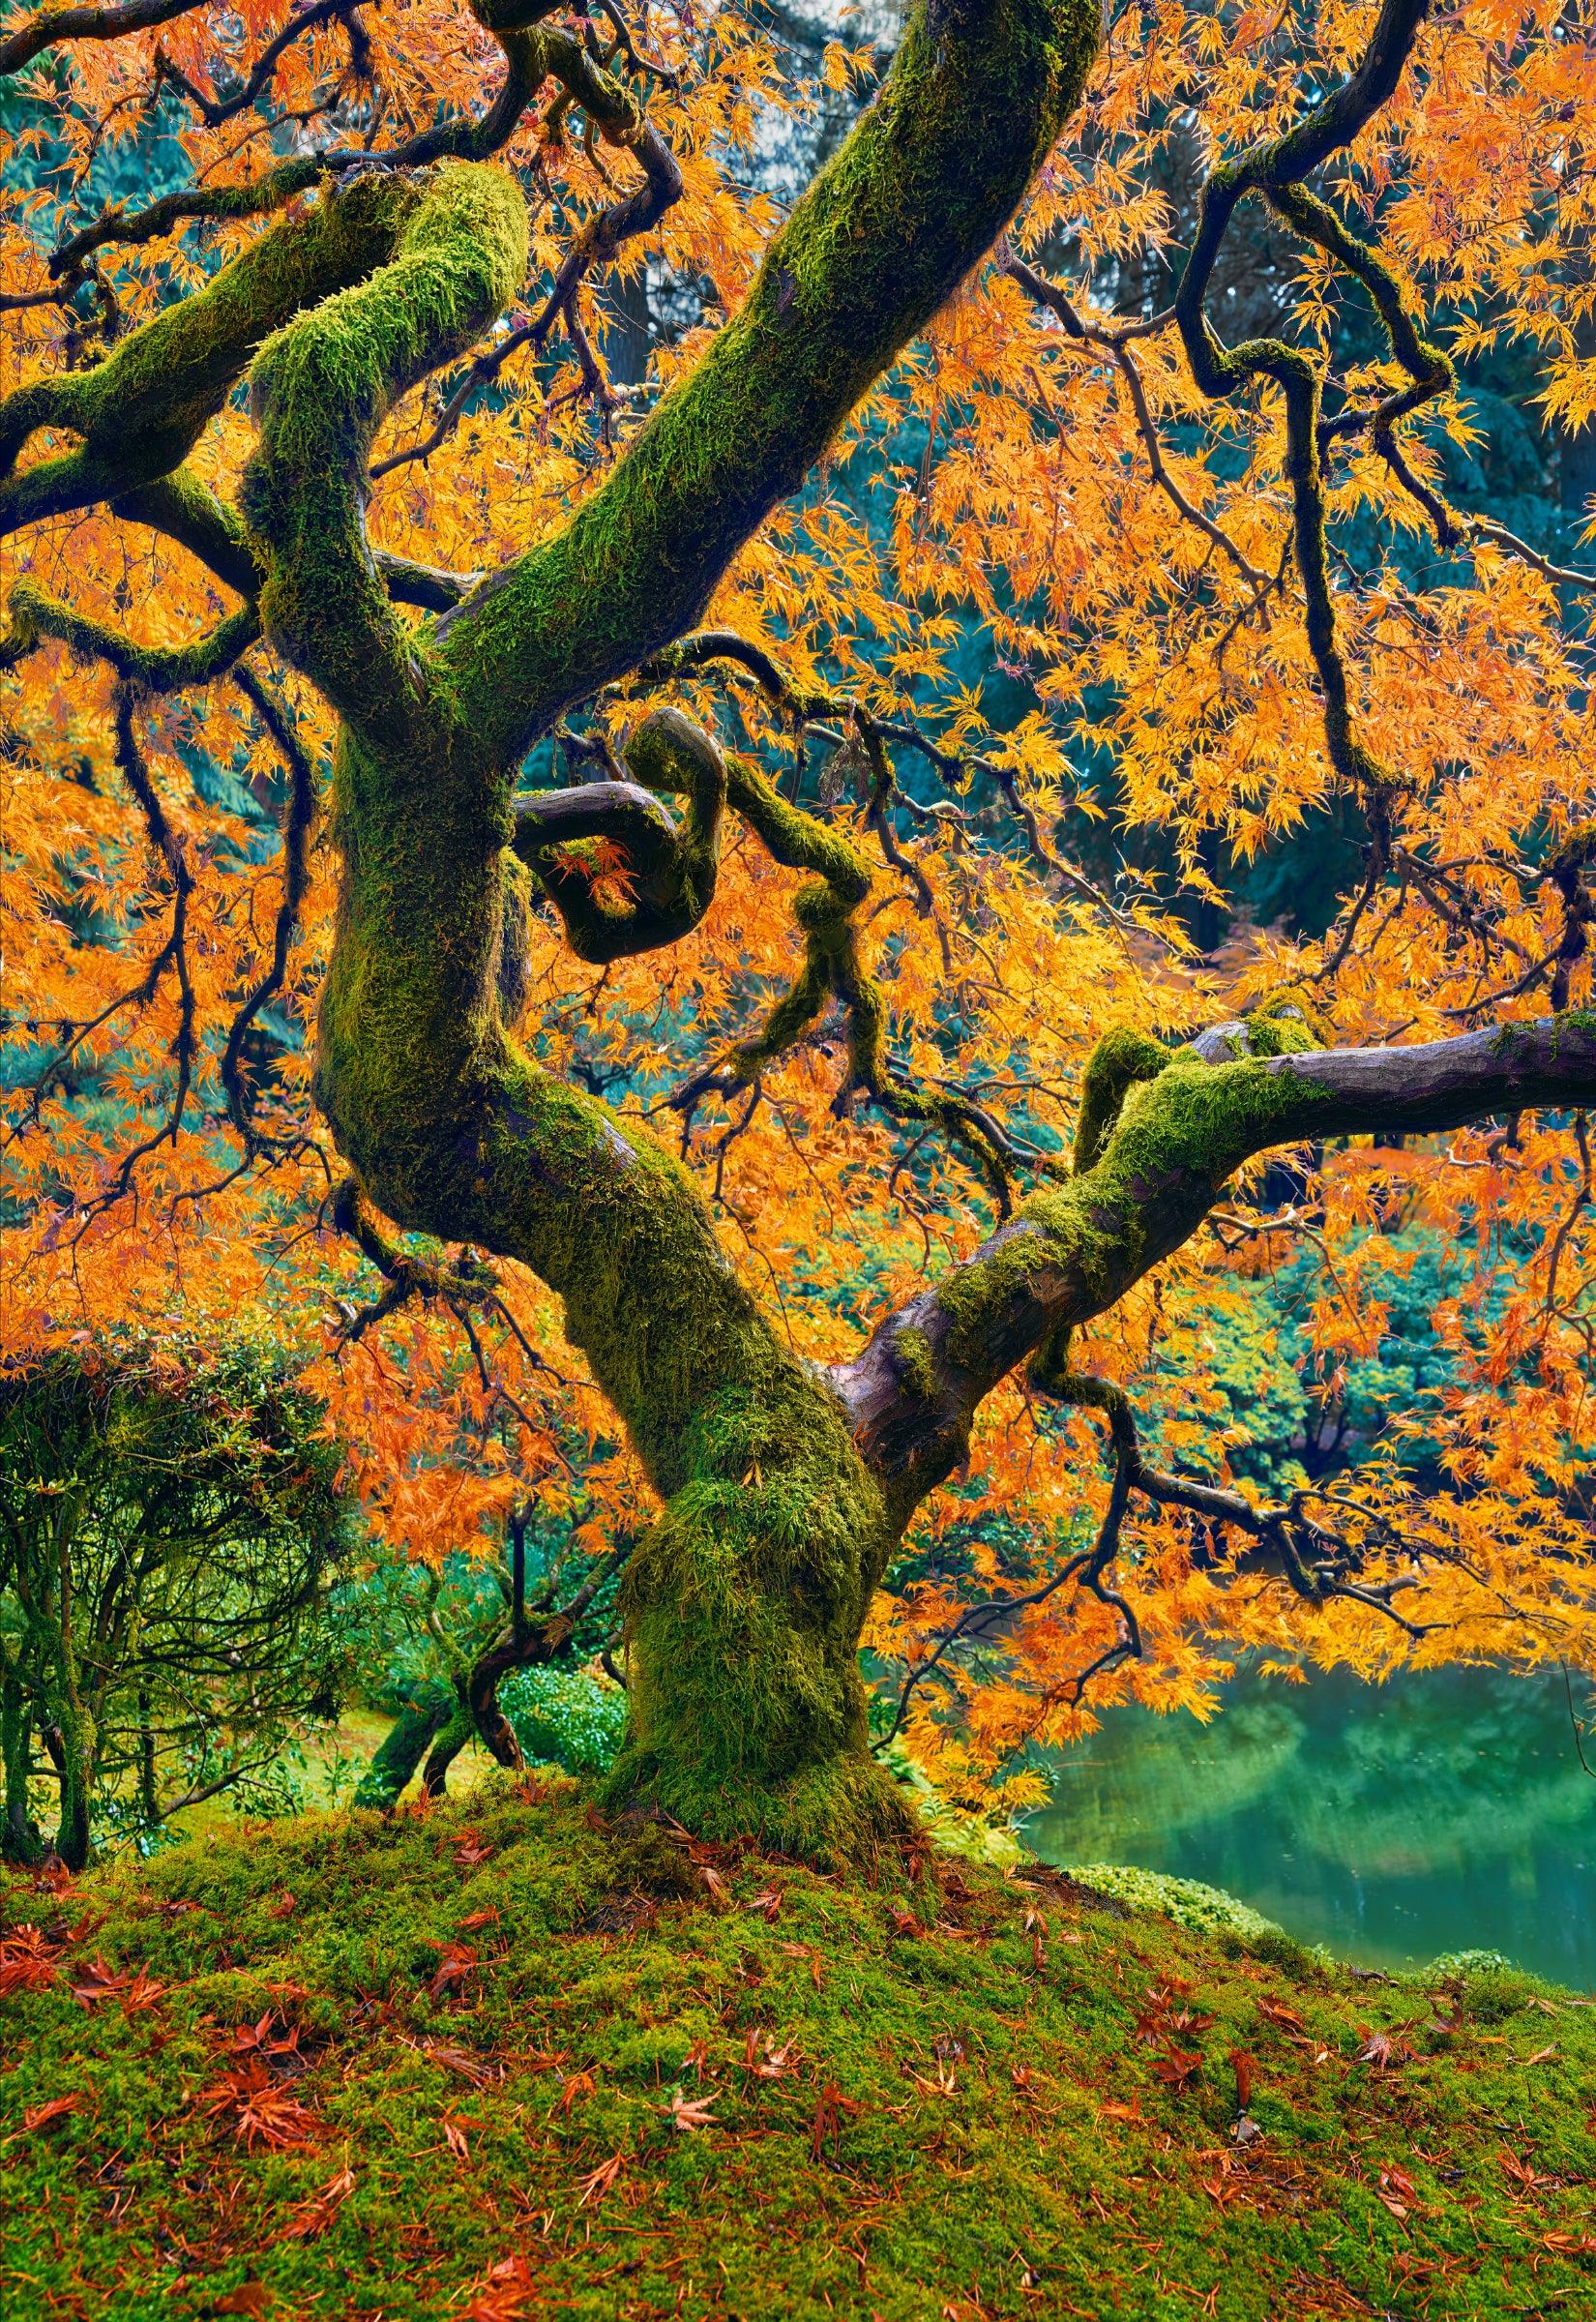 Trunk and branches of a Japanese Maple tree with orange leaves on a mossy hill